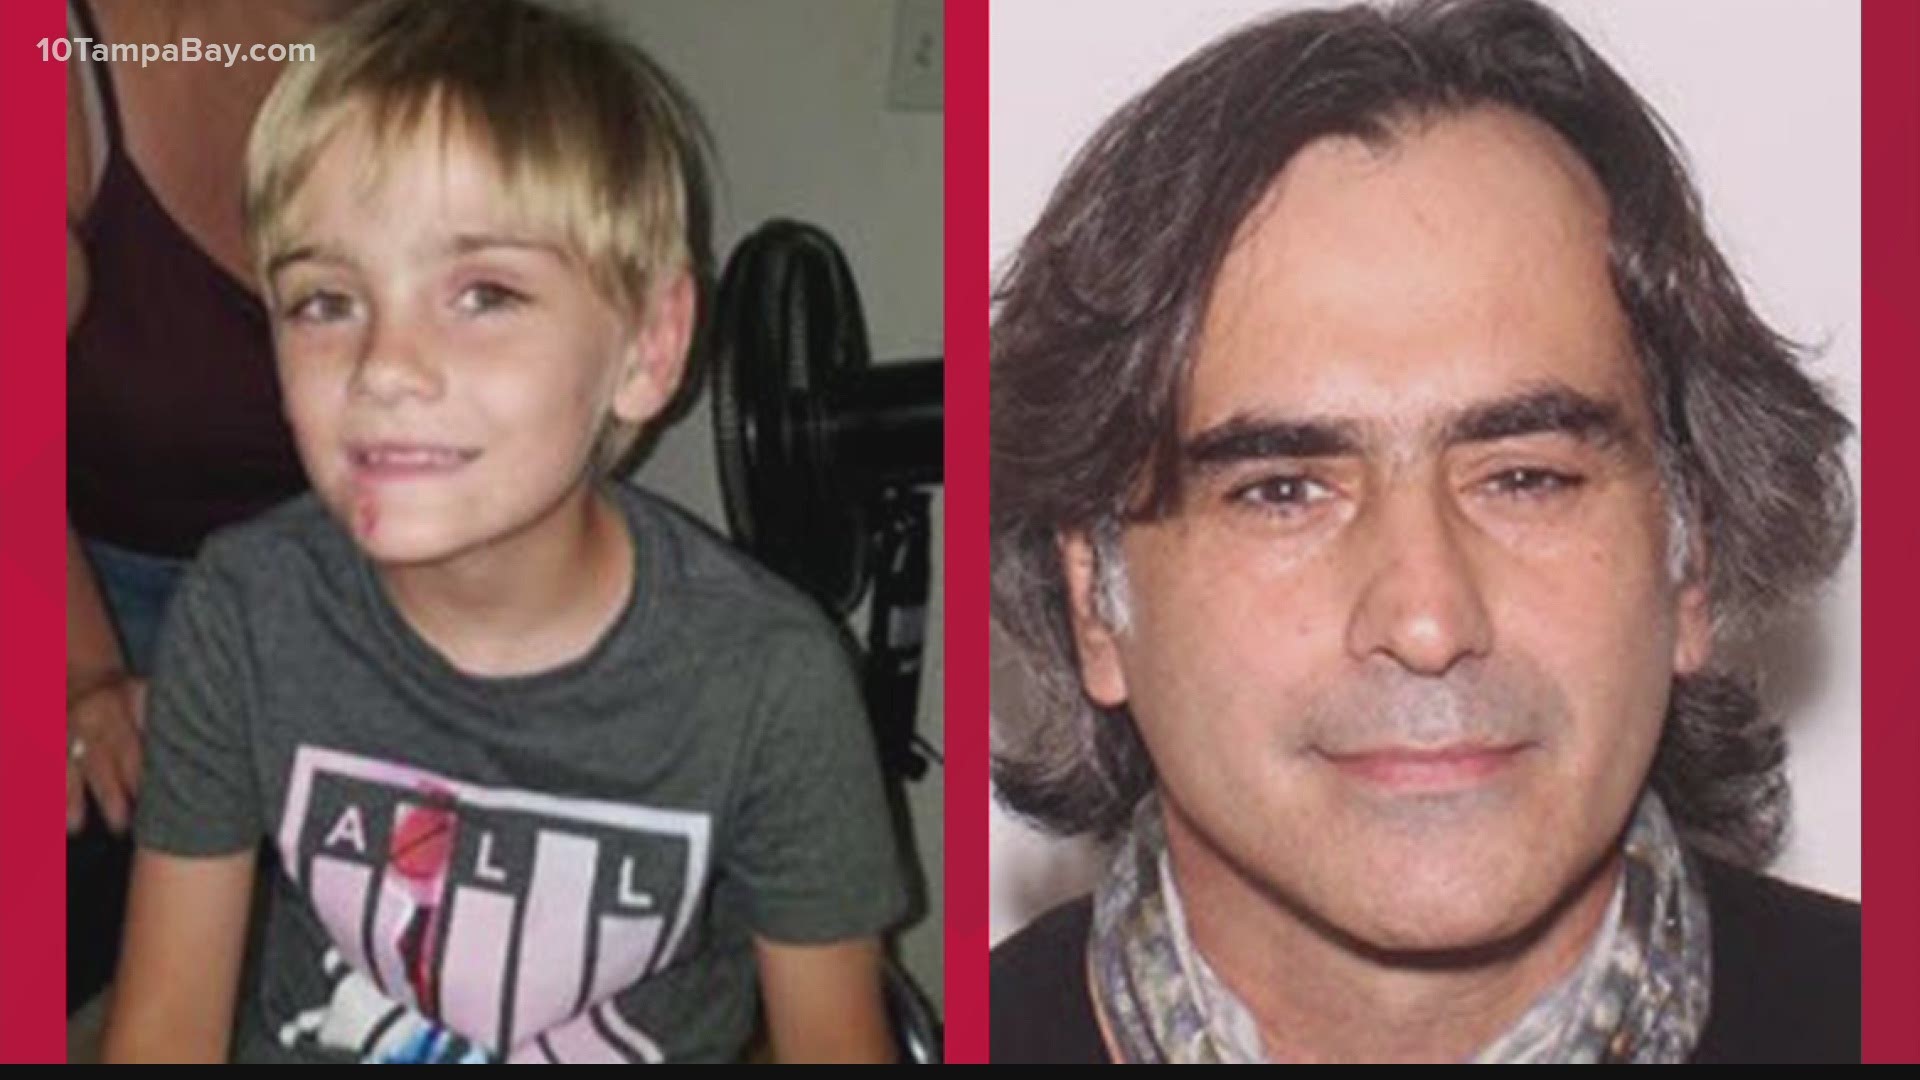 Florida law enforcement officers say they have found a missing child from Pasco County.